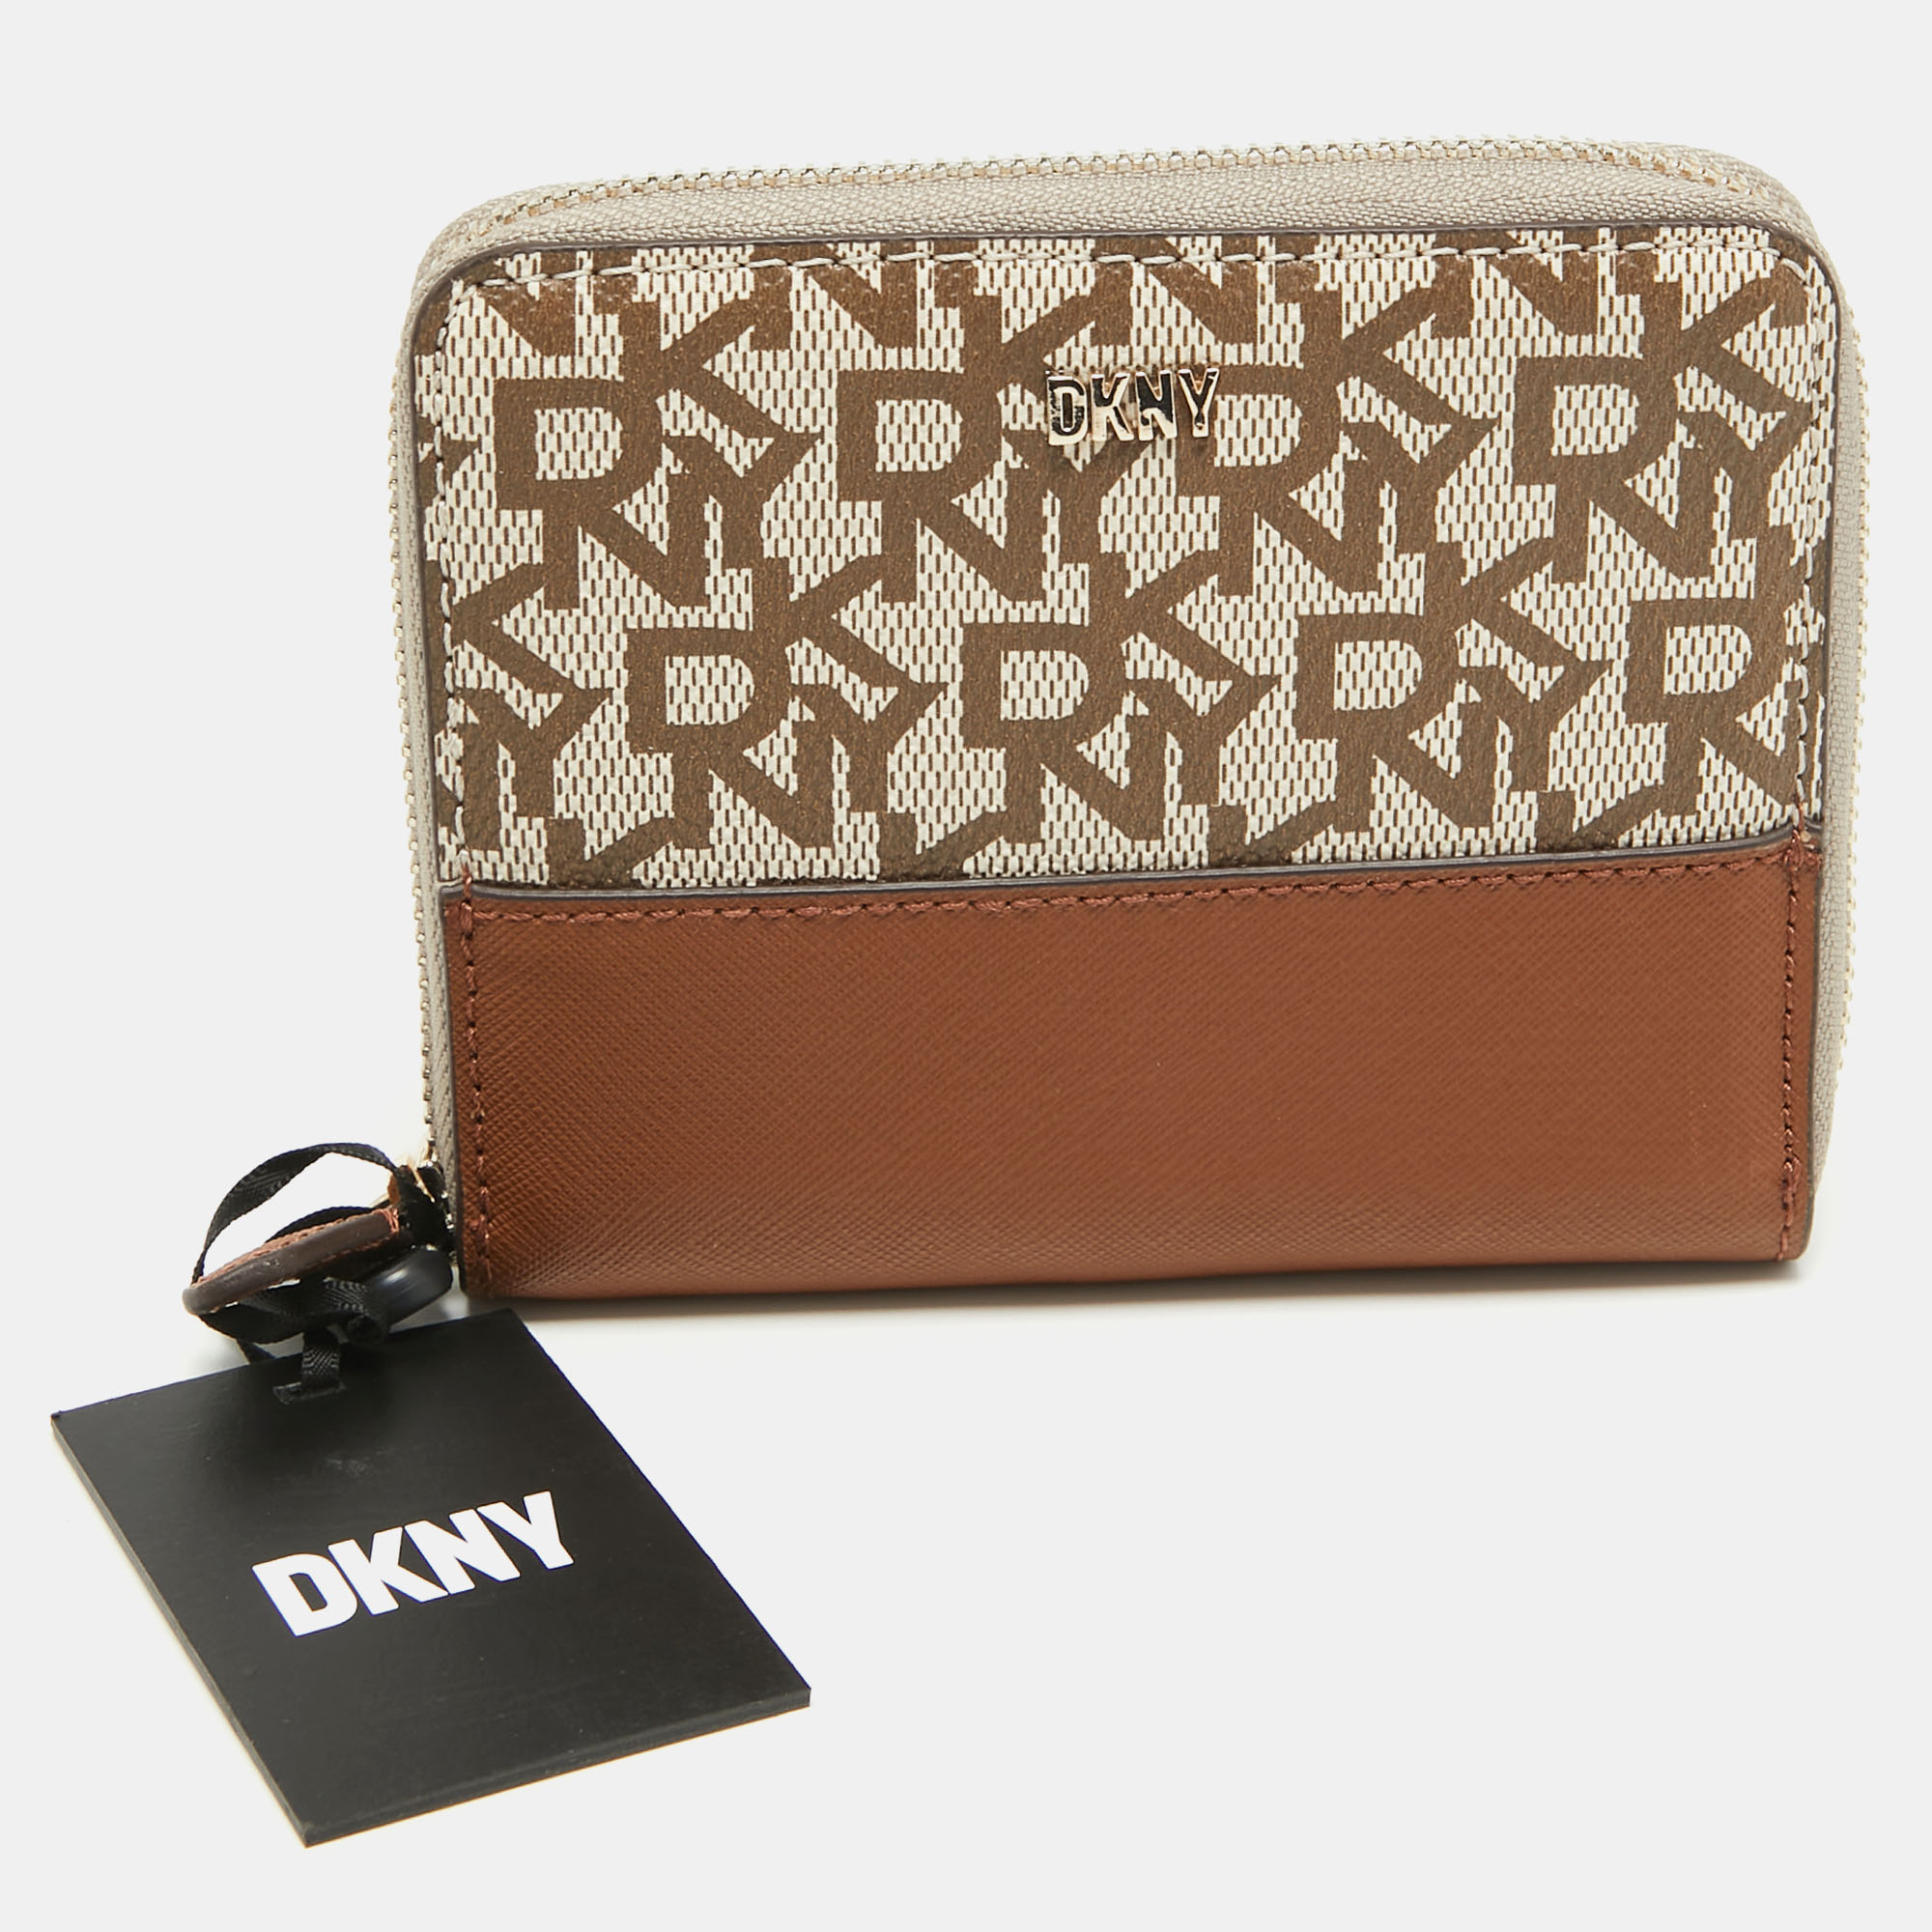 

DKNY Biege/Brown Signature Coated Canvas and Leather Vela Zip Around Wallet, Beige